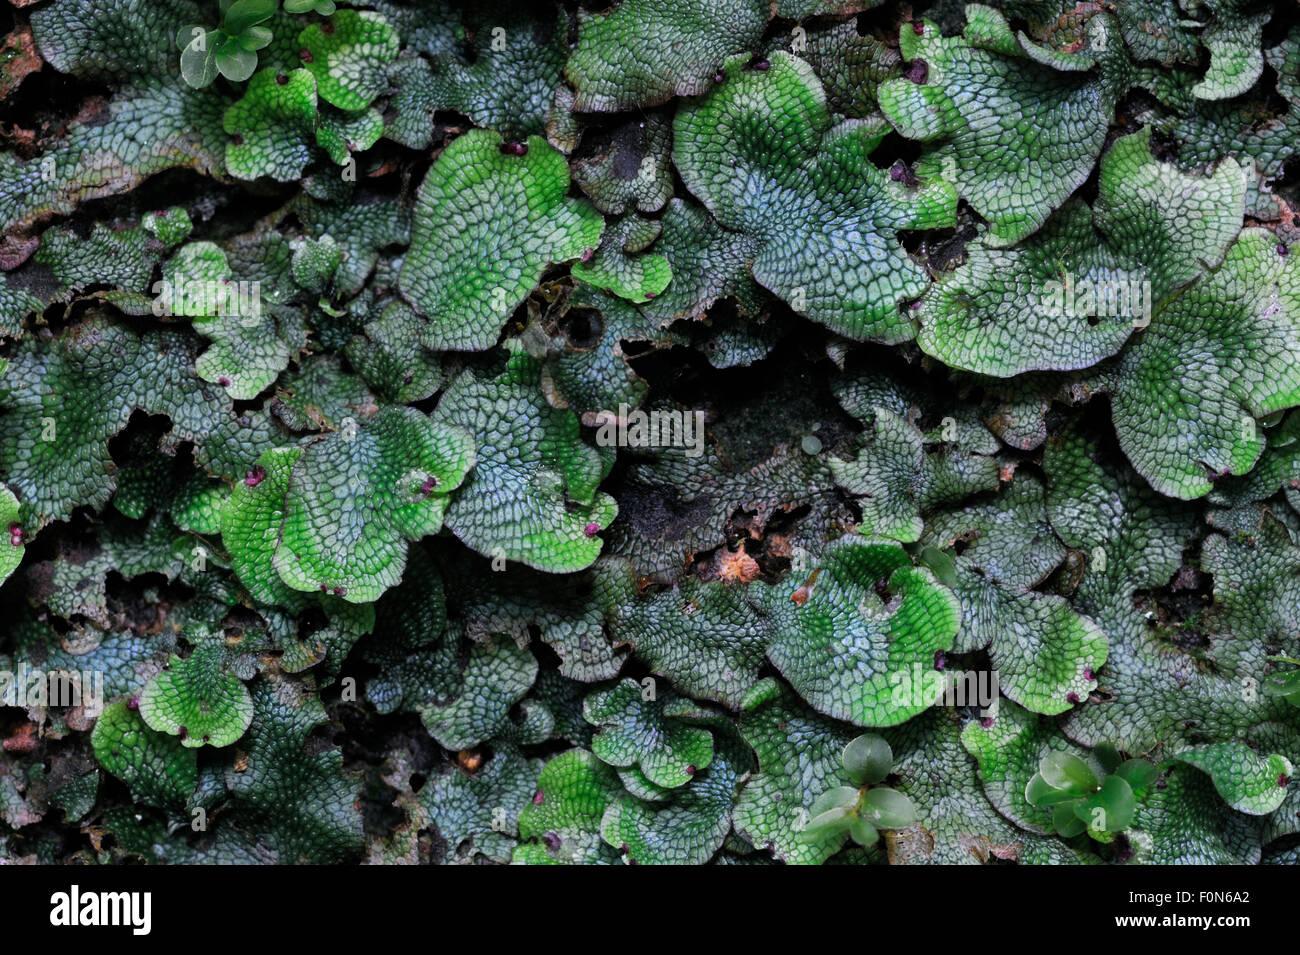 common-liverwort-jungermannia-polymorpha-and-dotted-thyme-moss-rhizomnium-F0N6A2.jpg